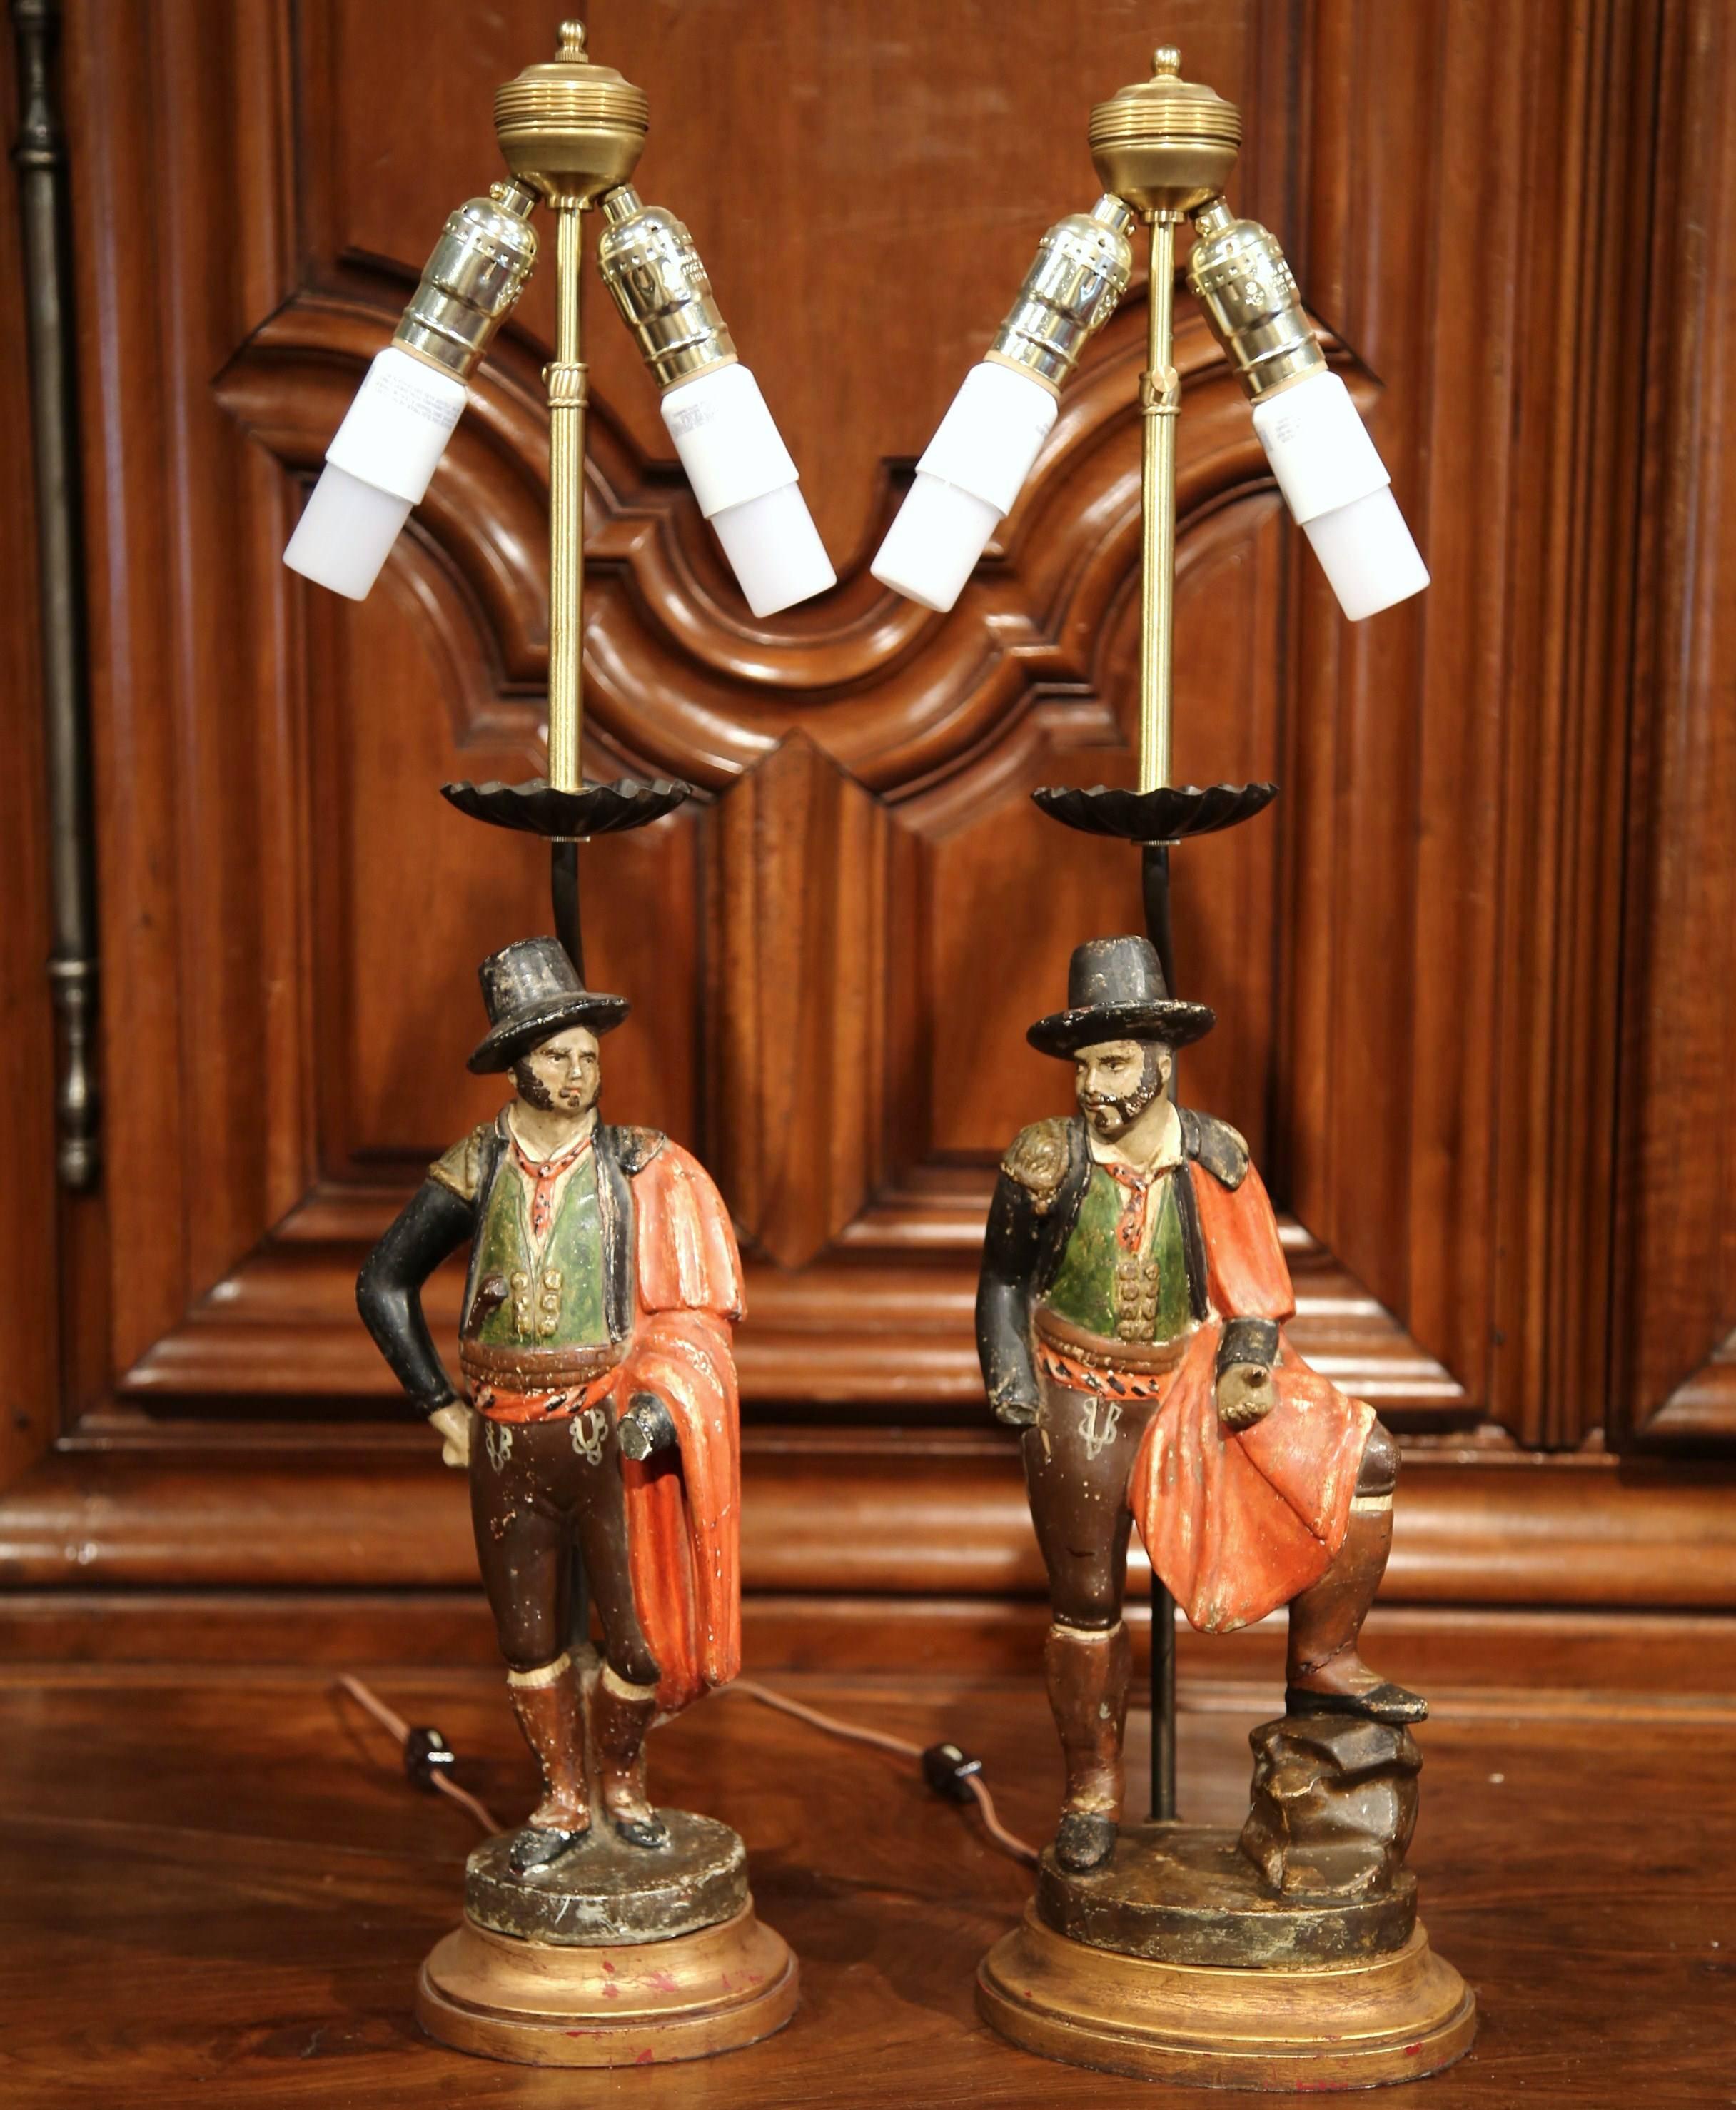 This beautiful pair of lamps was crafted in Spain, circa 1870. Standing on a gilt wooden base, each lamp depicts a carved matador figure with a red cape on his shoulder. Both light fixtures have their original painted finish in a red and brown color